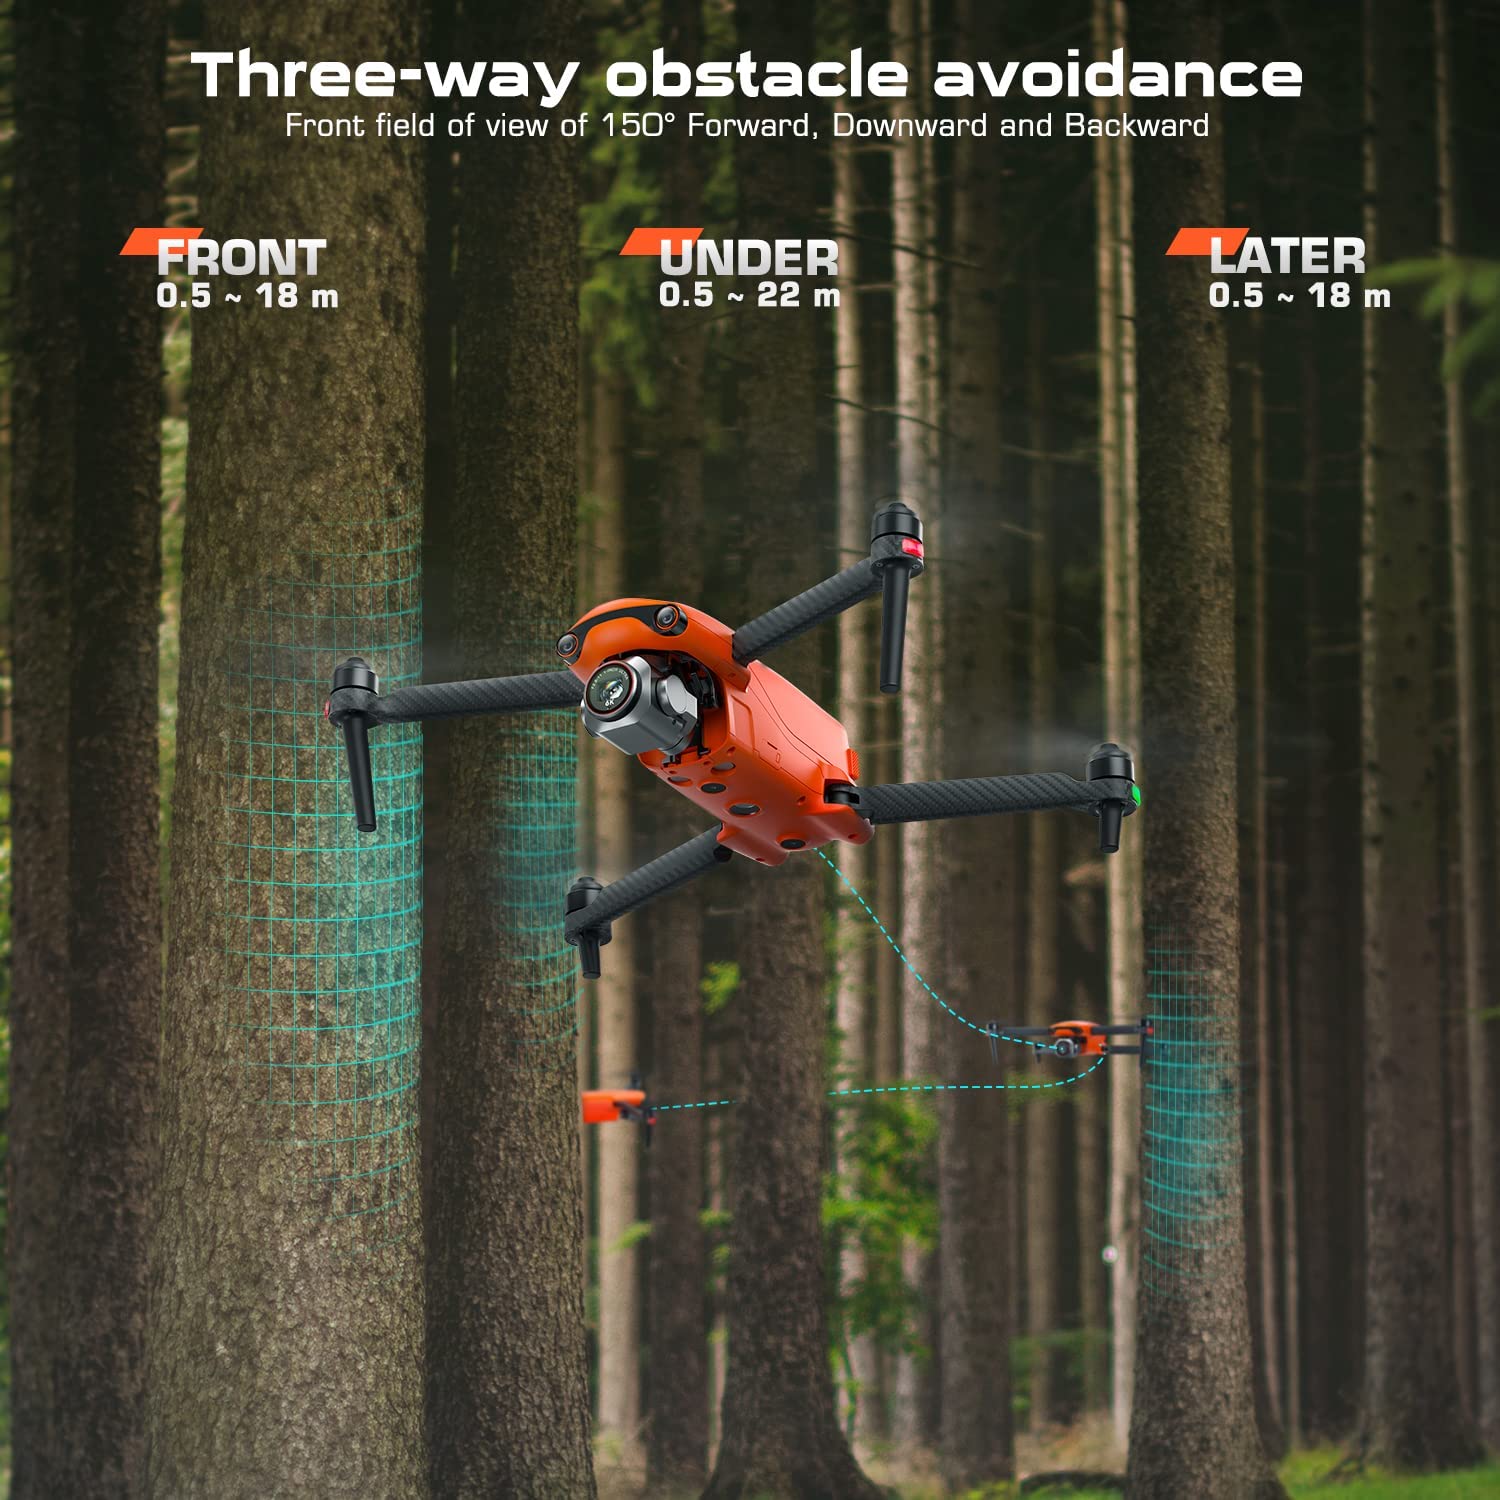 Autel Robotics EVO Lite+ Plus Drone Standard - 6K Aircraft with 1" CMOS Sensor, F2.8-F11 Adjustable Aperture , 3-Axis Gimbal, 3-Way Obstacle Avoidance, 40Min Flight Time, 7.4 Miles Transmission